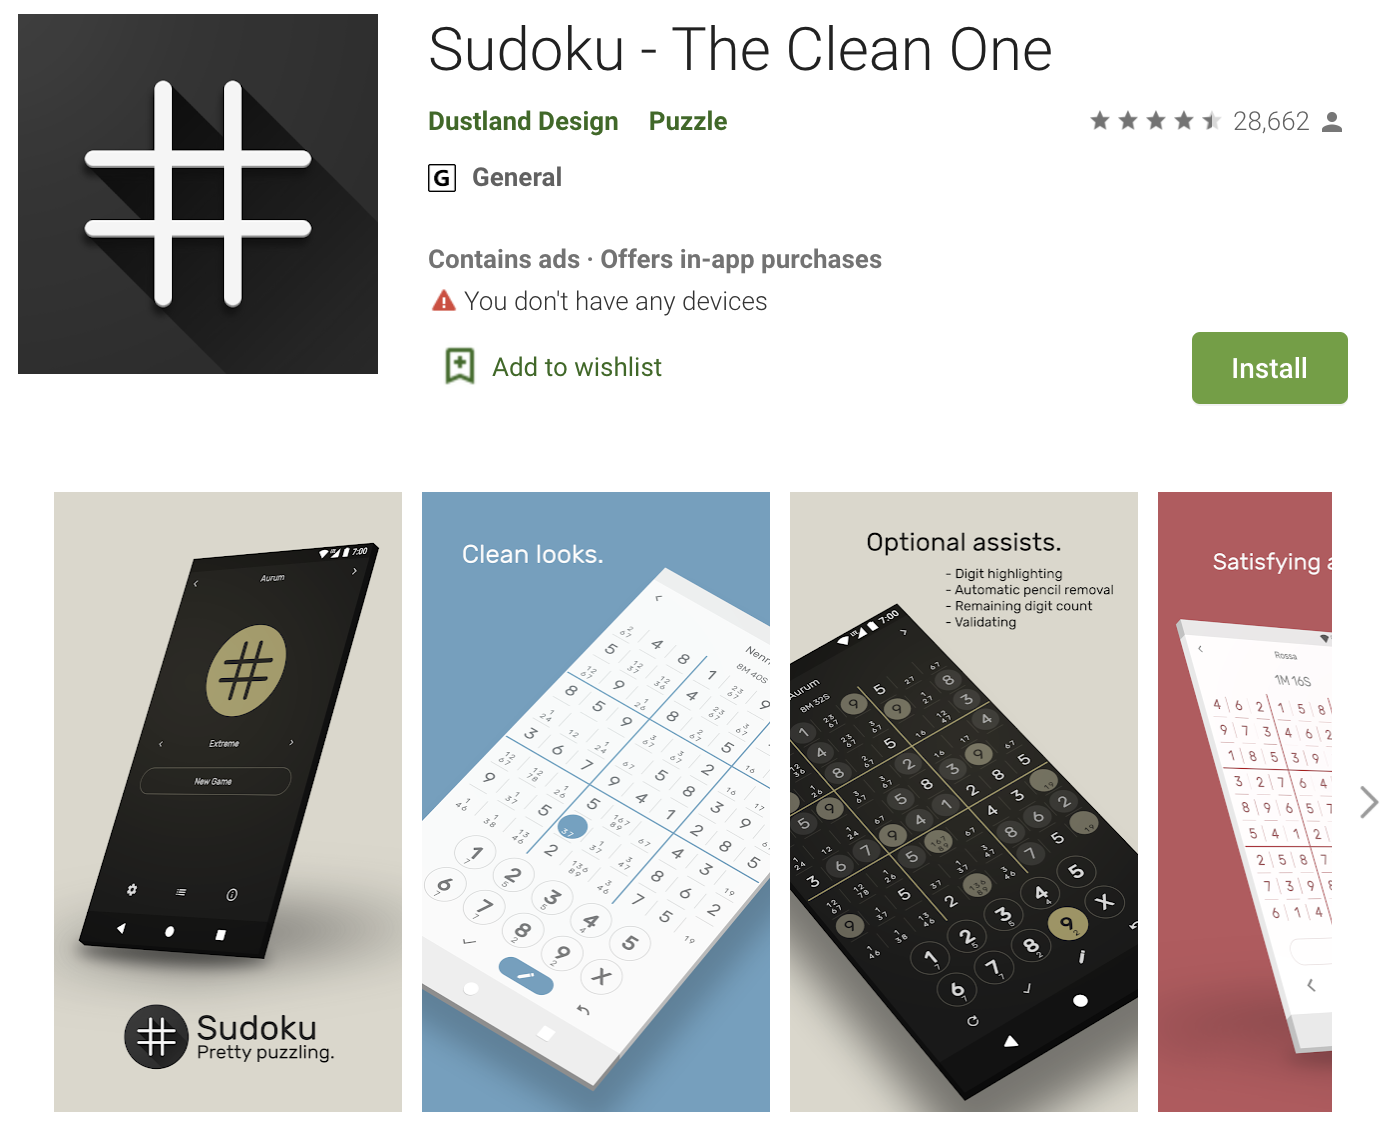 sudoku - the clean one android app